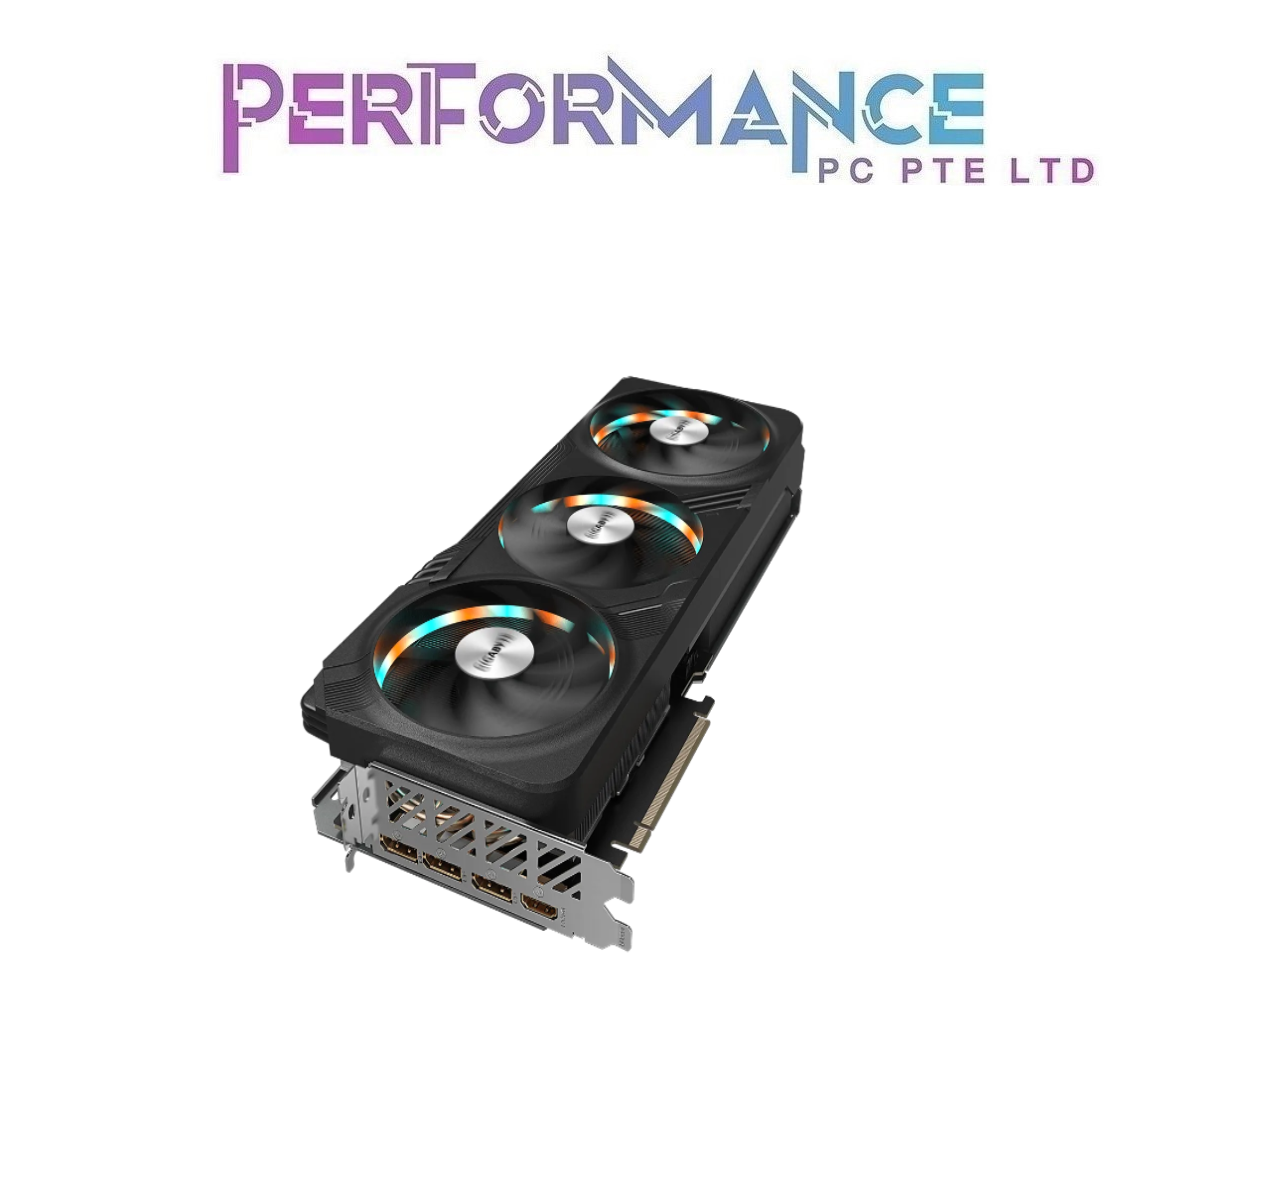 GIGABYTE GV N407TGAMING OC-12GD GRAPHICS CARD (4 YEARS WARRANTY CDL TRADING PTE LTD)